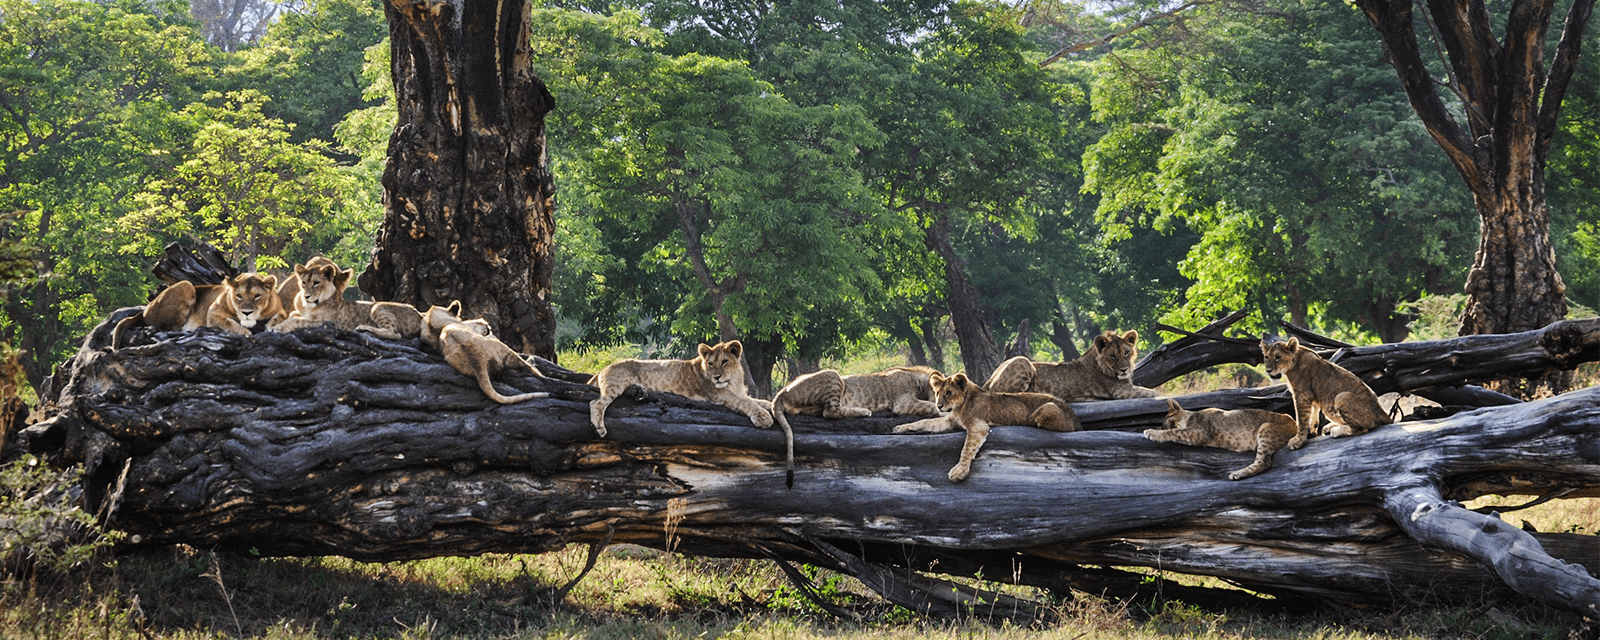 Lions lounging on a fallen tree